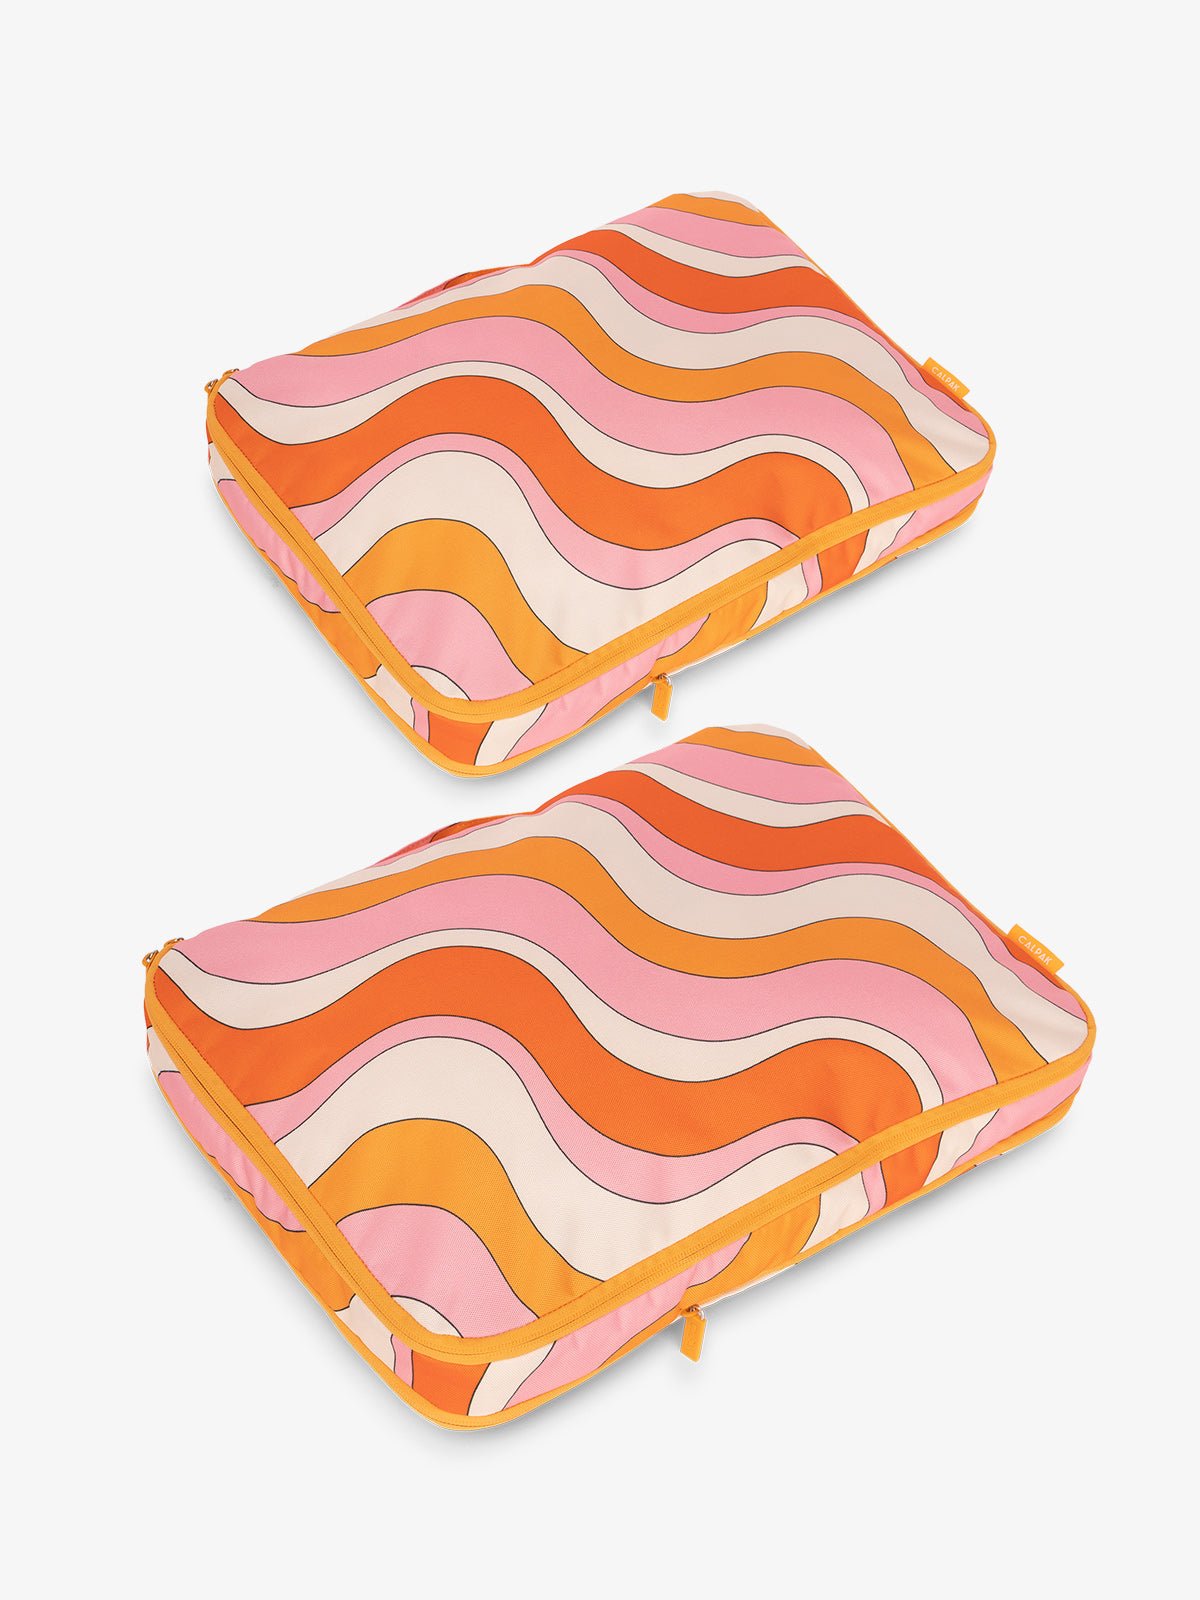 CALPAK Large Compression Packing Cubes in orange and pink wavy print